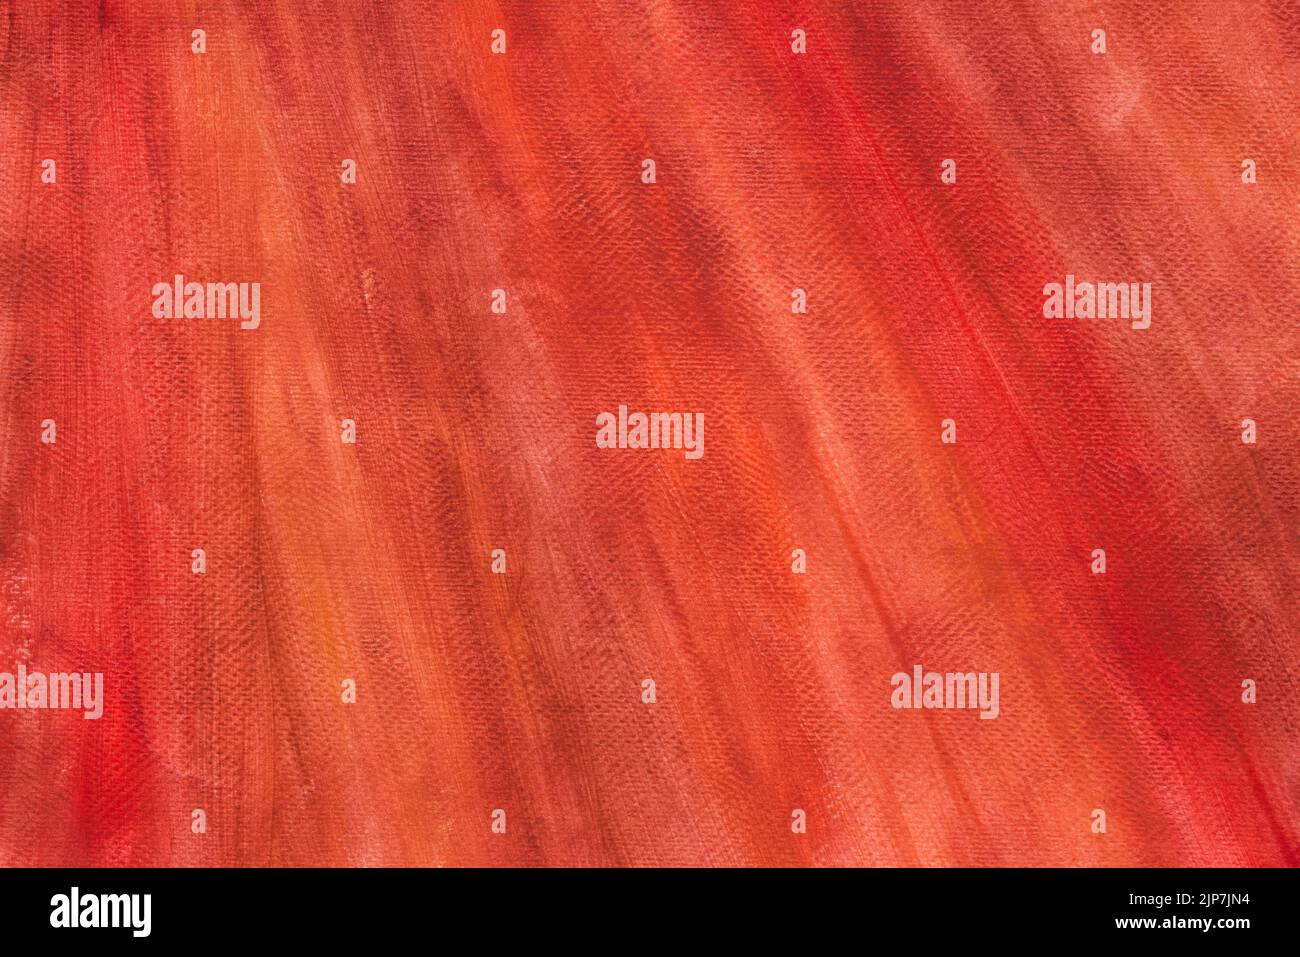 brown color painted acrylic background texture Stock Photo